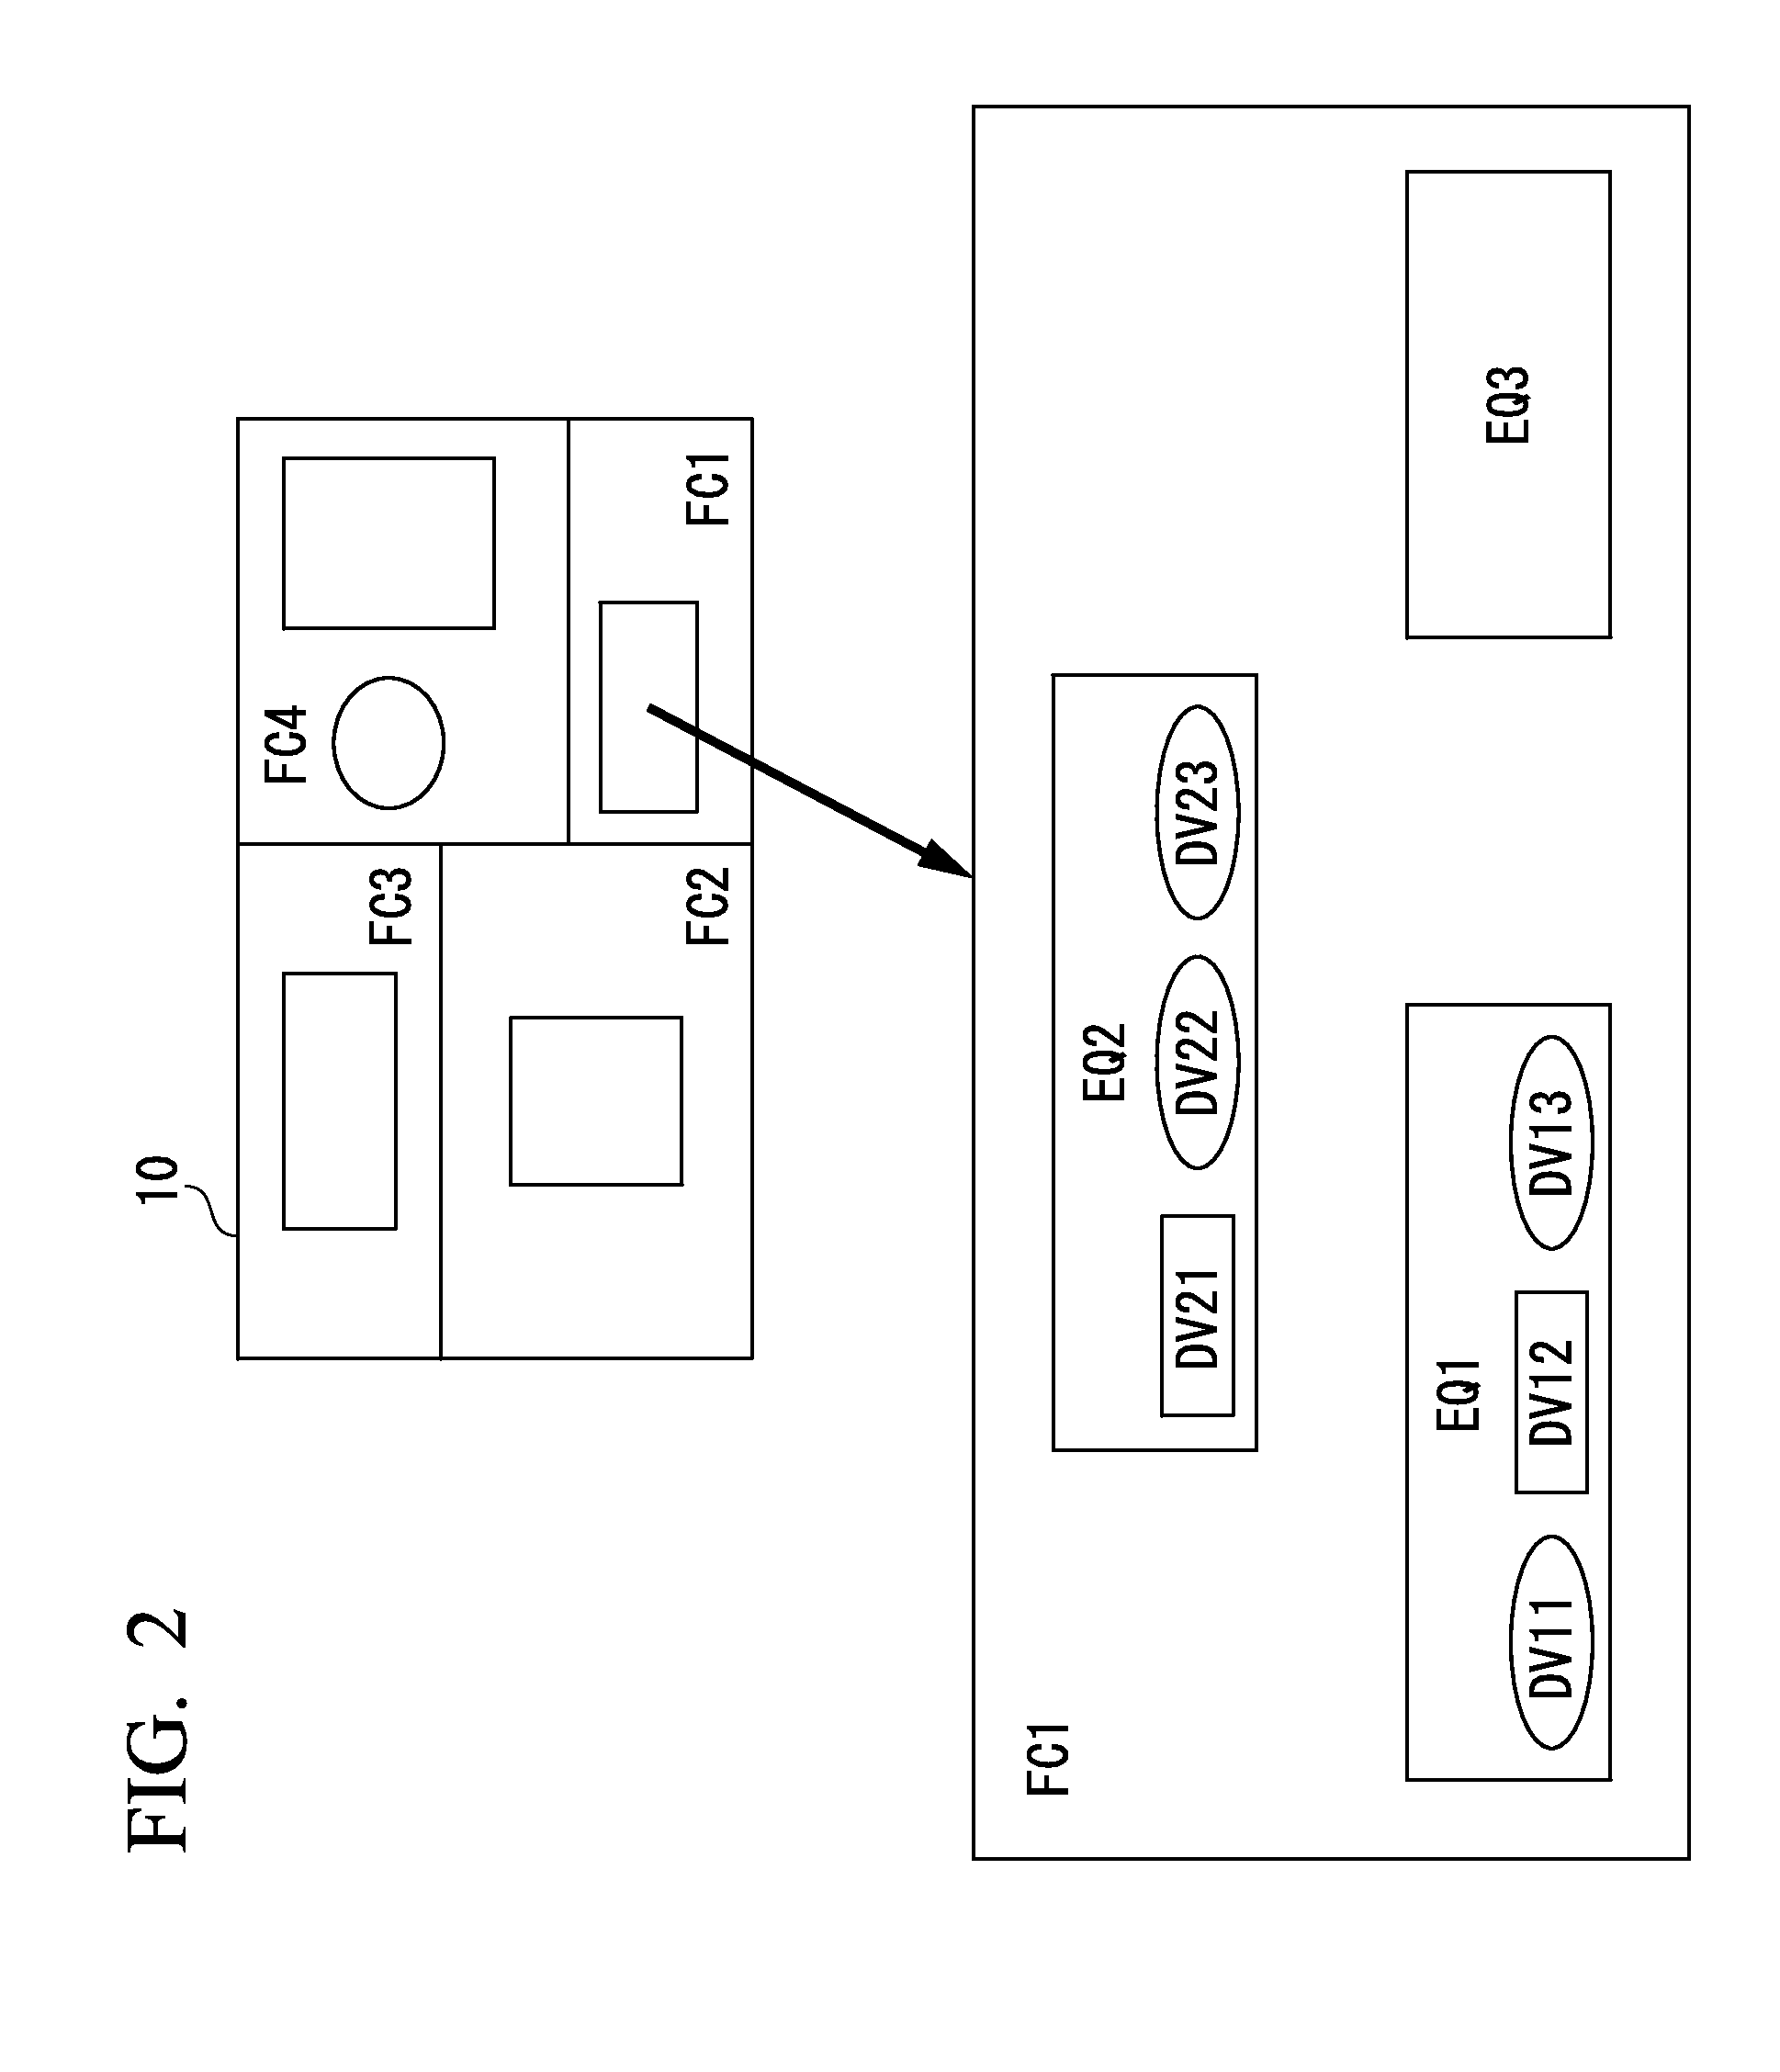 Energy management system, display control apparatus, display method, and computer-readable storage medium